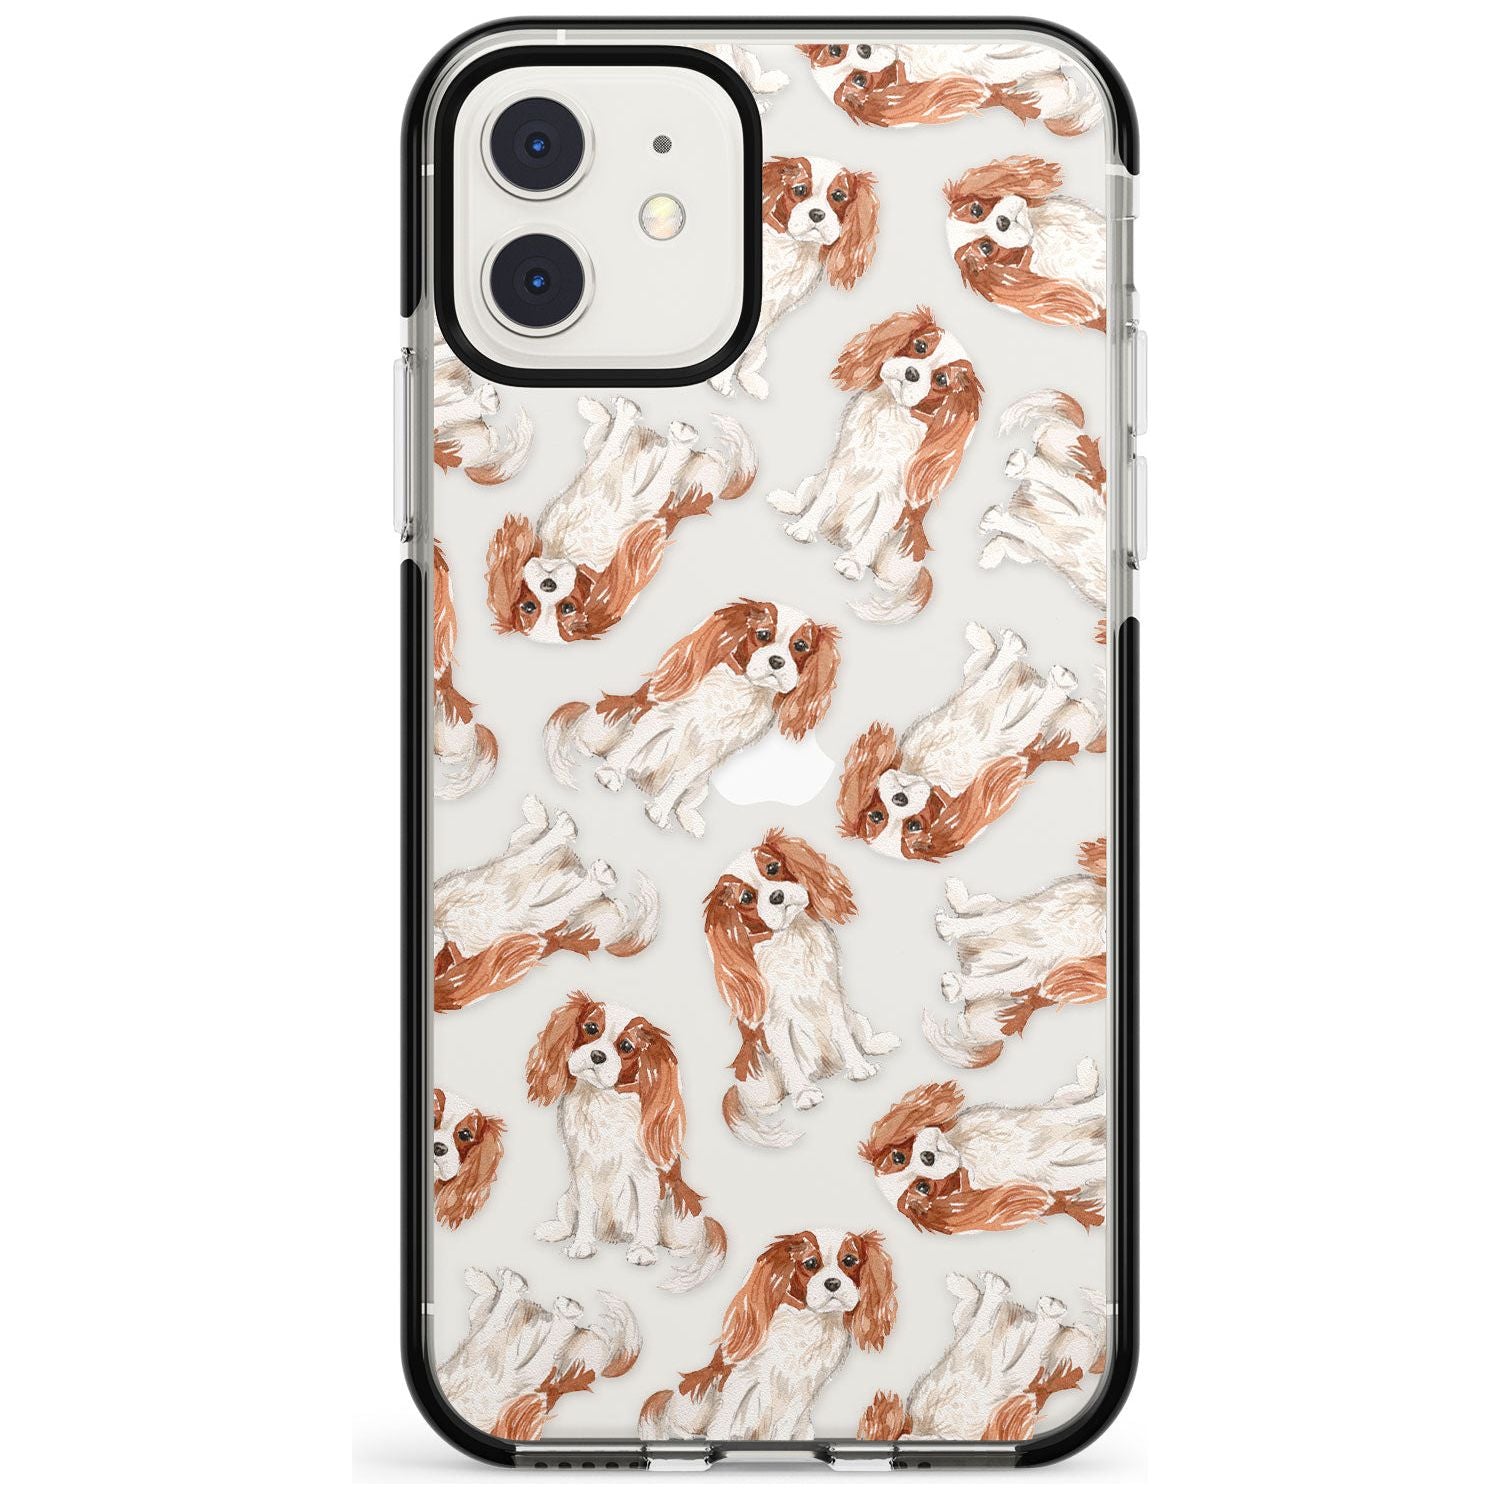 Cavalier King Charles Spaniel Dog Pattern Black Impact Phone Case for iPhone 11